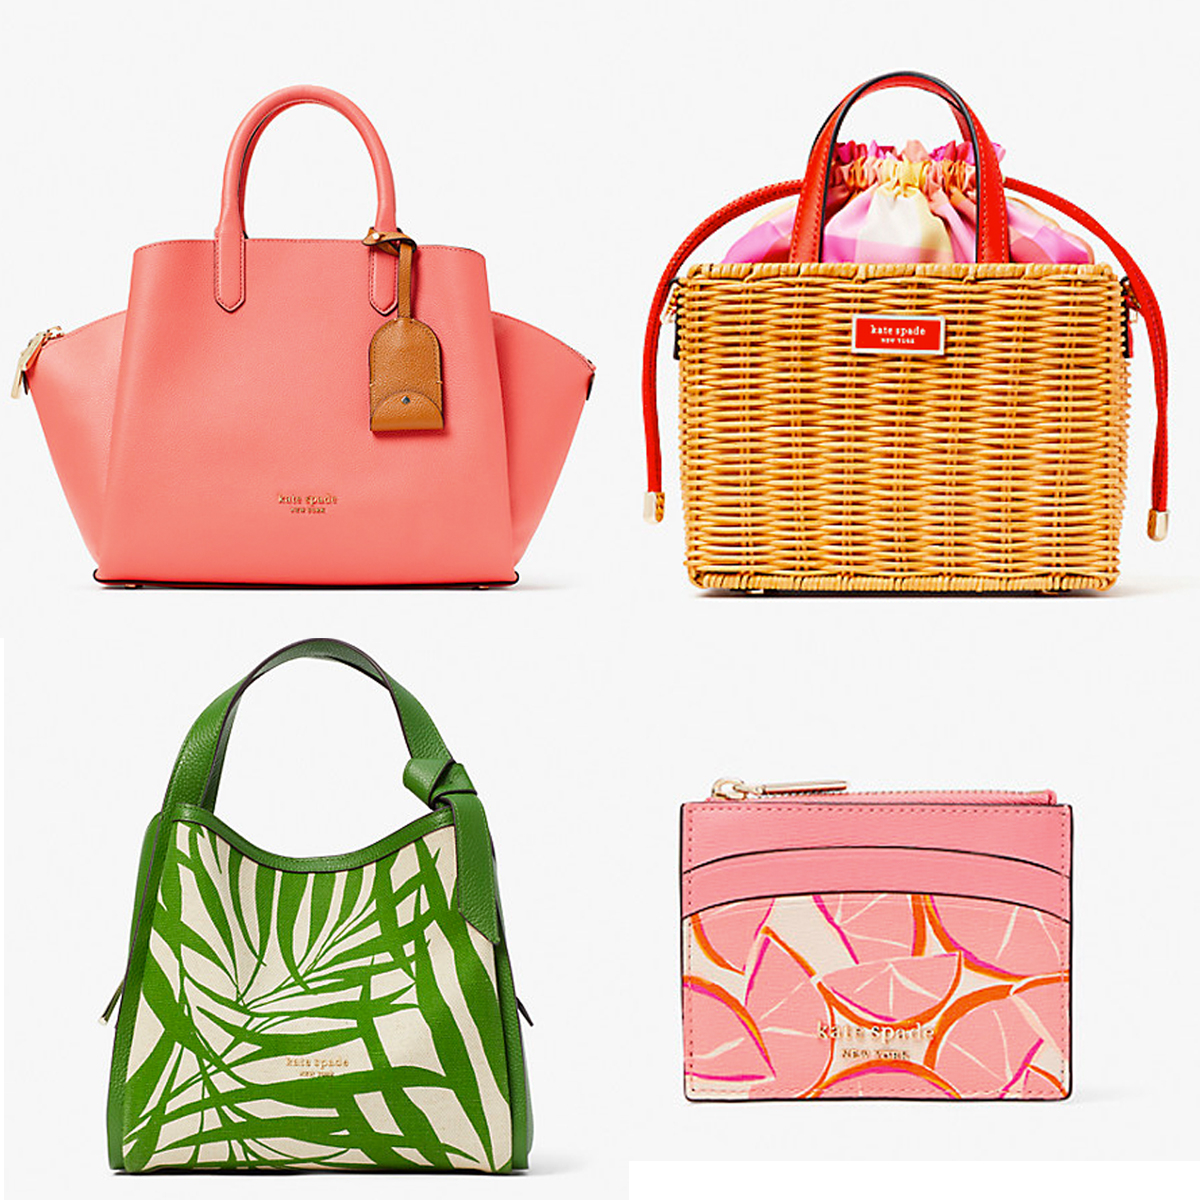 The Kate Spade Outlet Sale Is Up to 70 Percent Off RN - PureWow